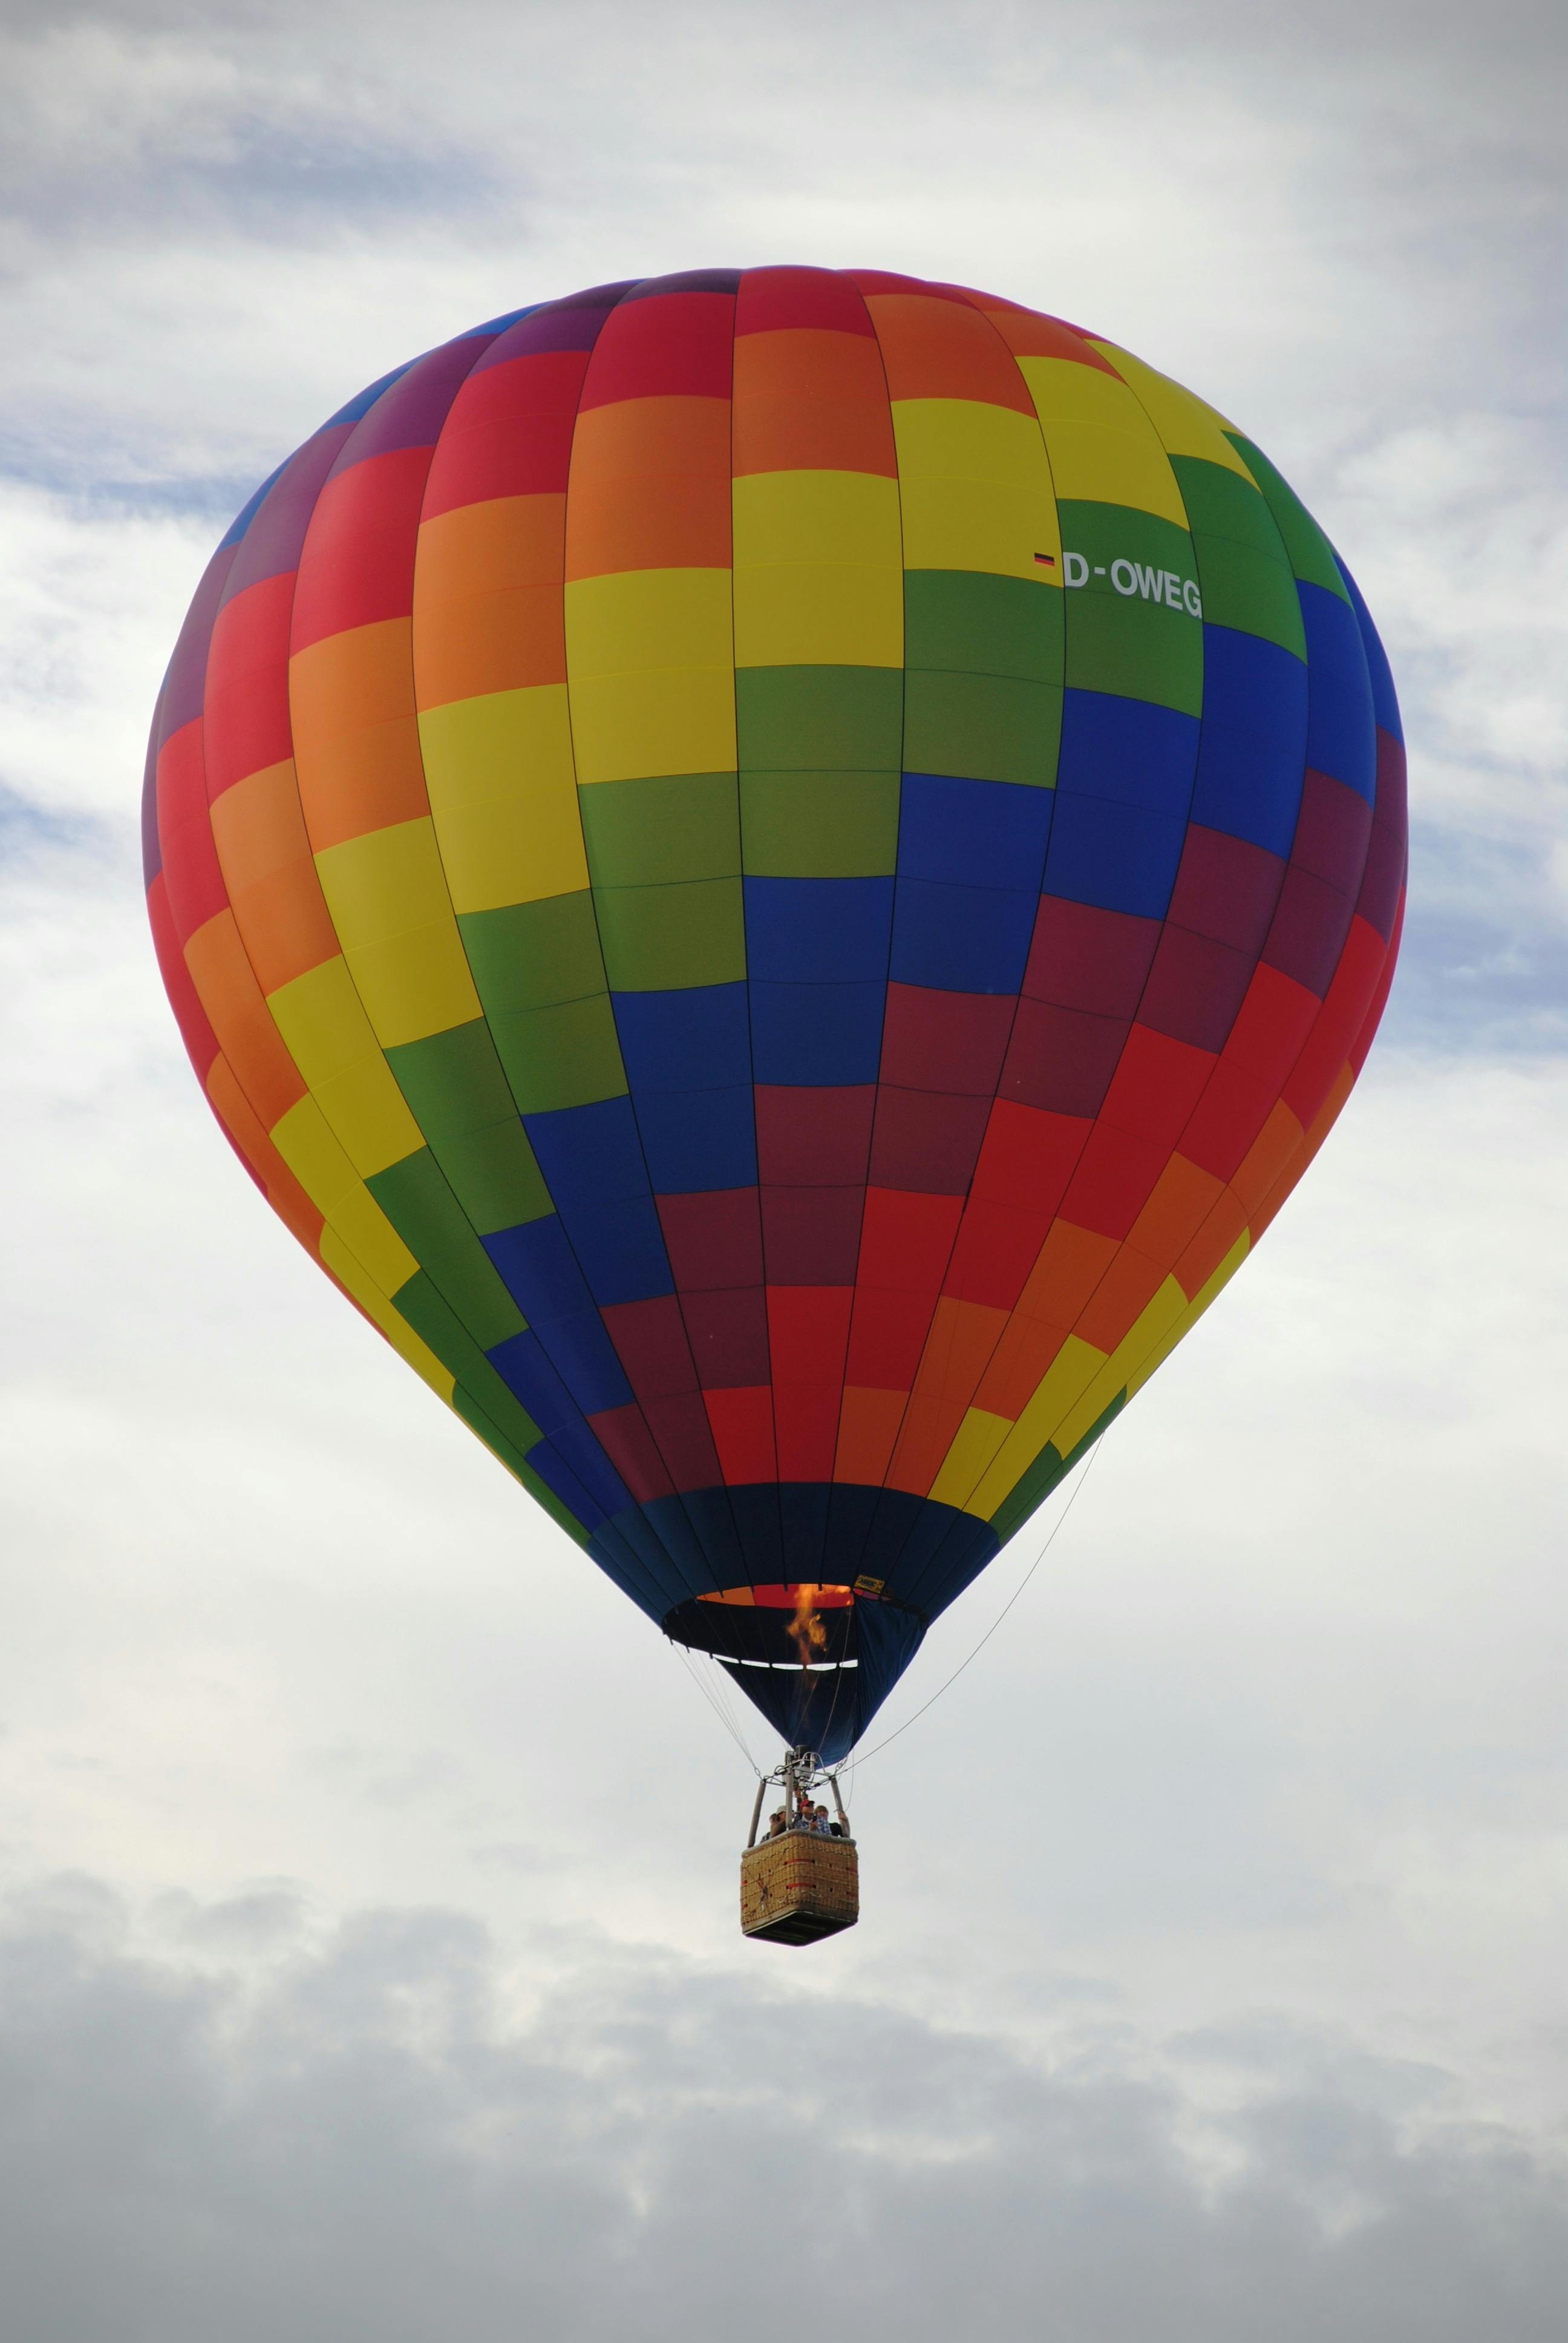 hot-air-balloon-images-outlet-100-save-47-jlcatj-gob-mx